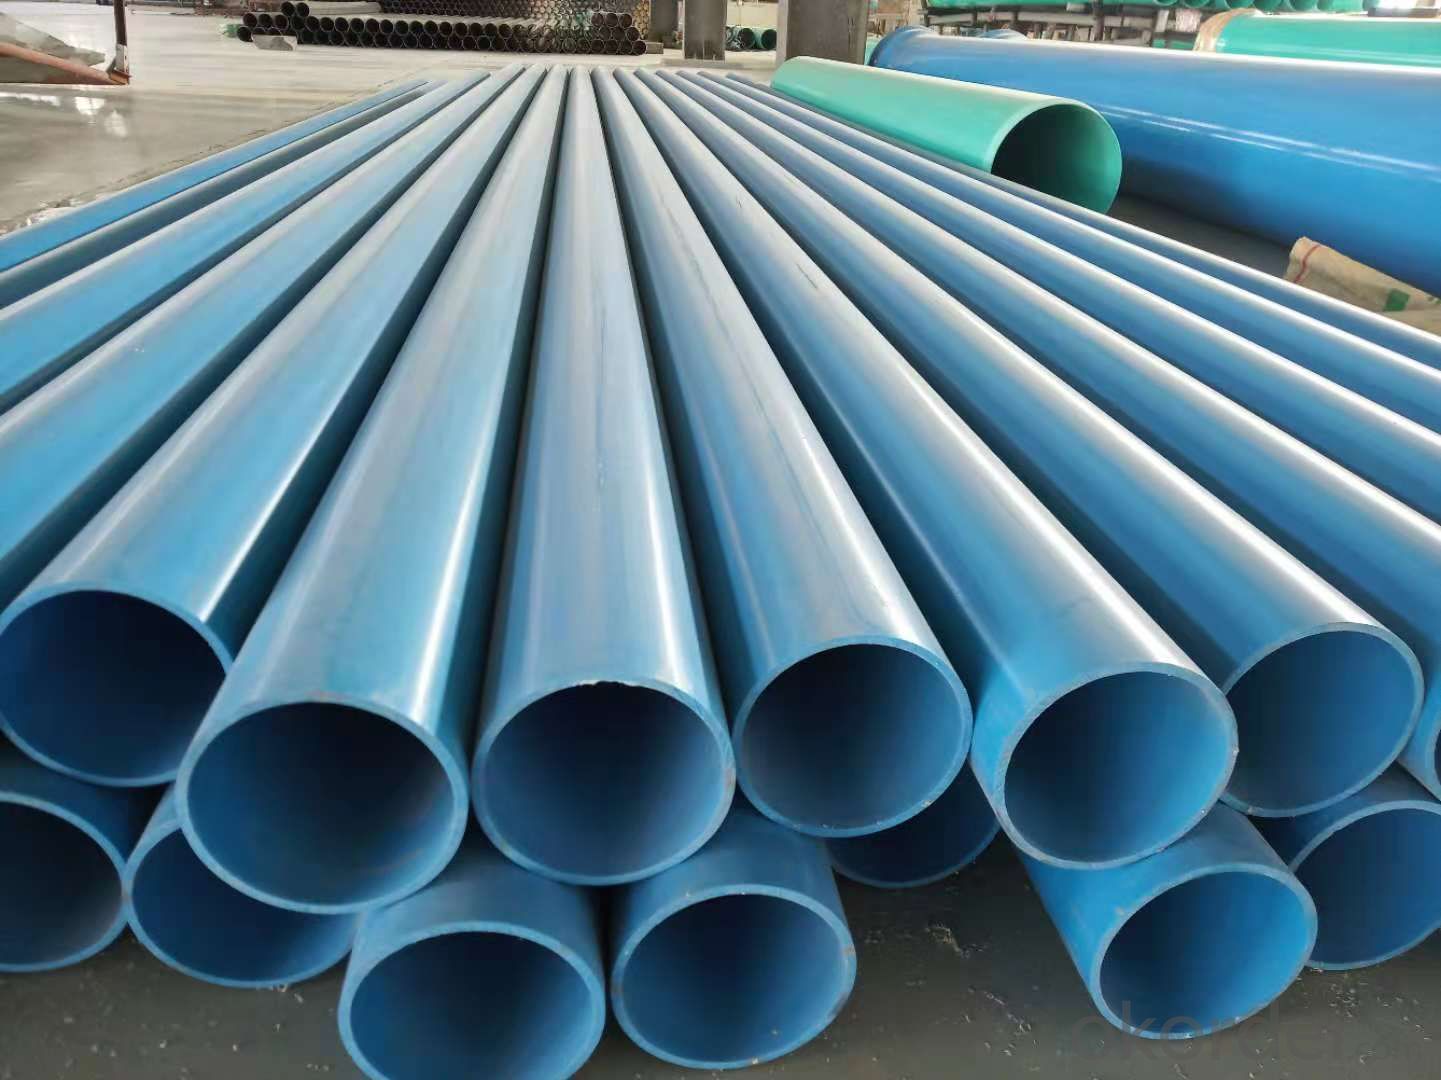 Pvc Water Supply Pipe Sizes - Design Talk